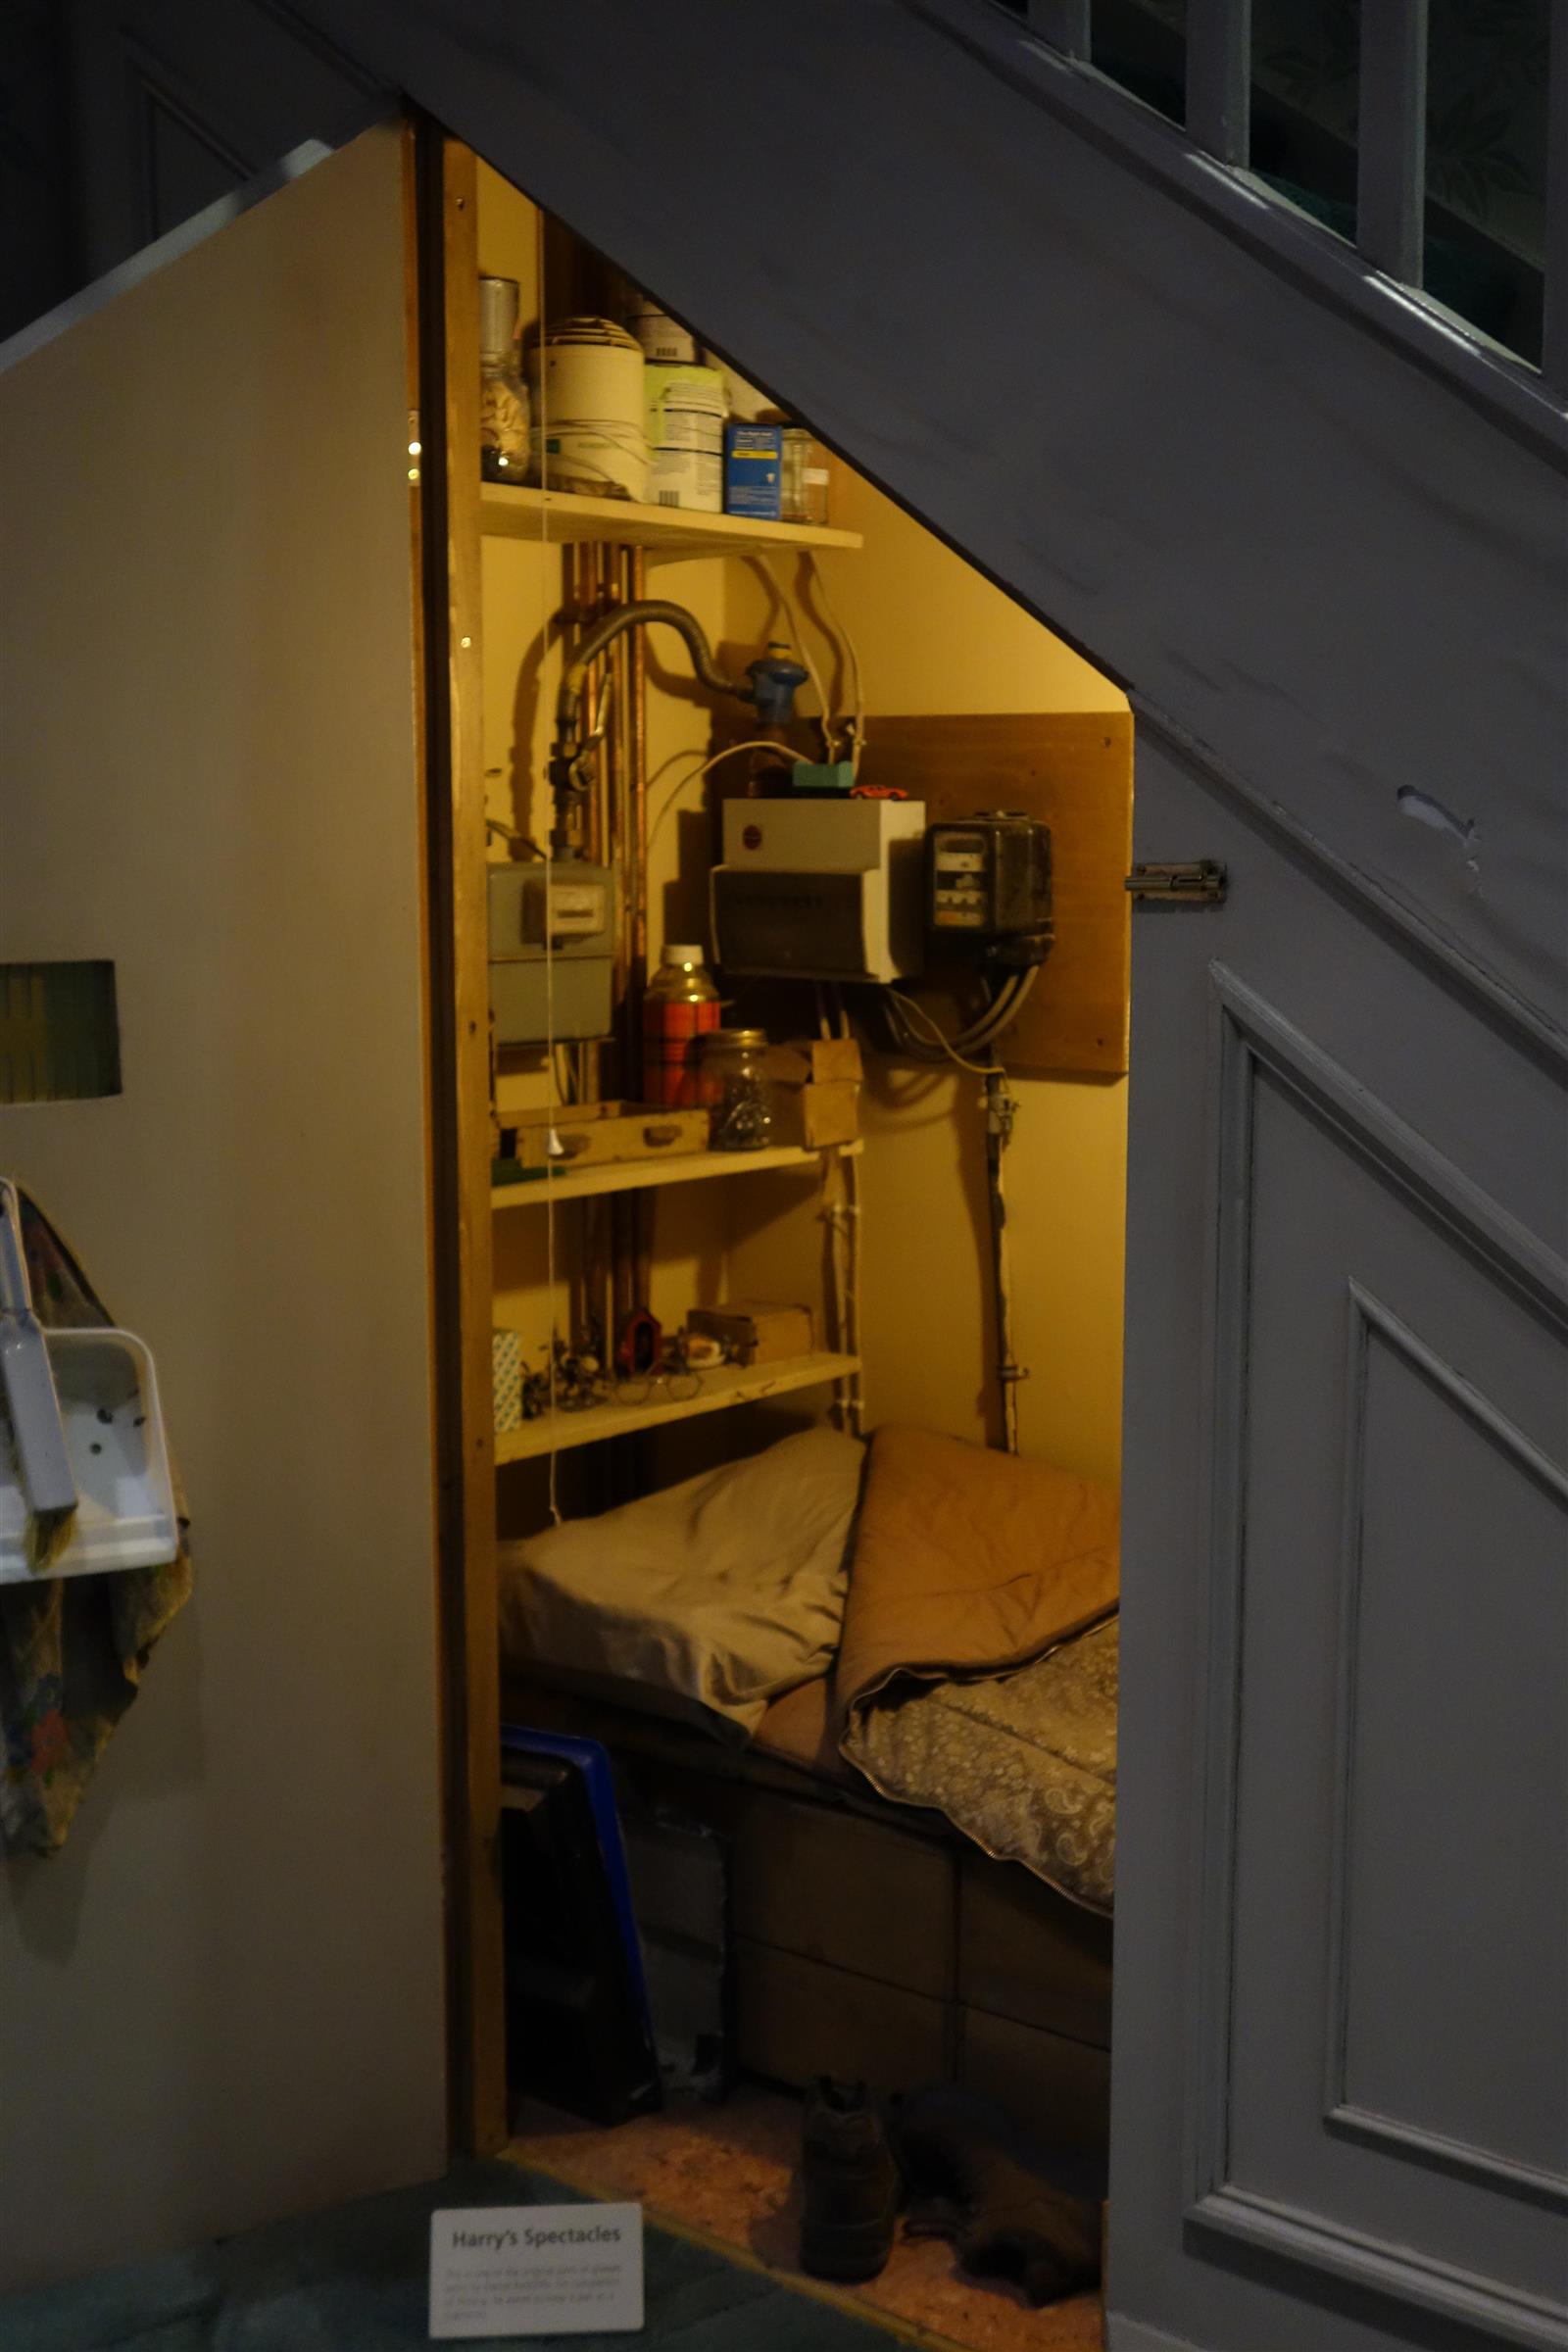 3. Cupboard Under The Stairs